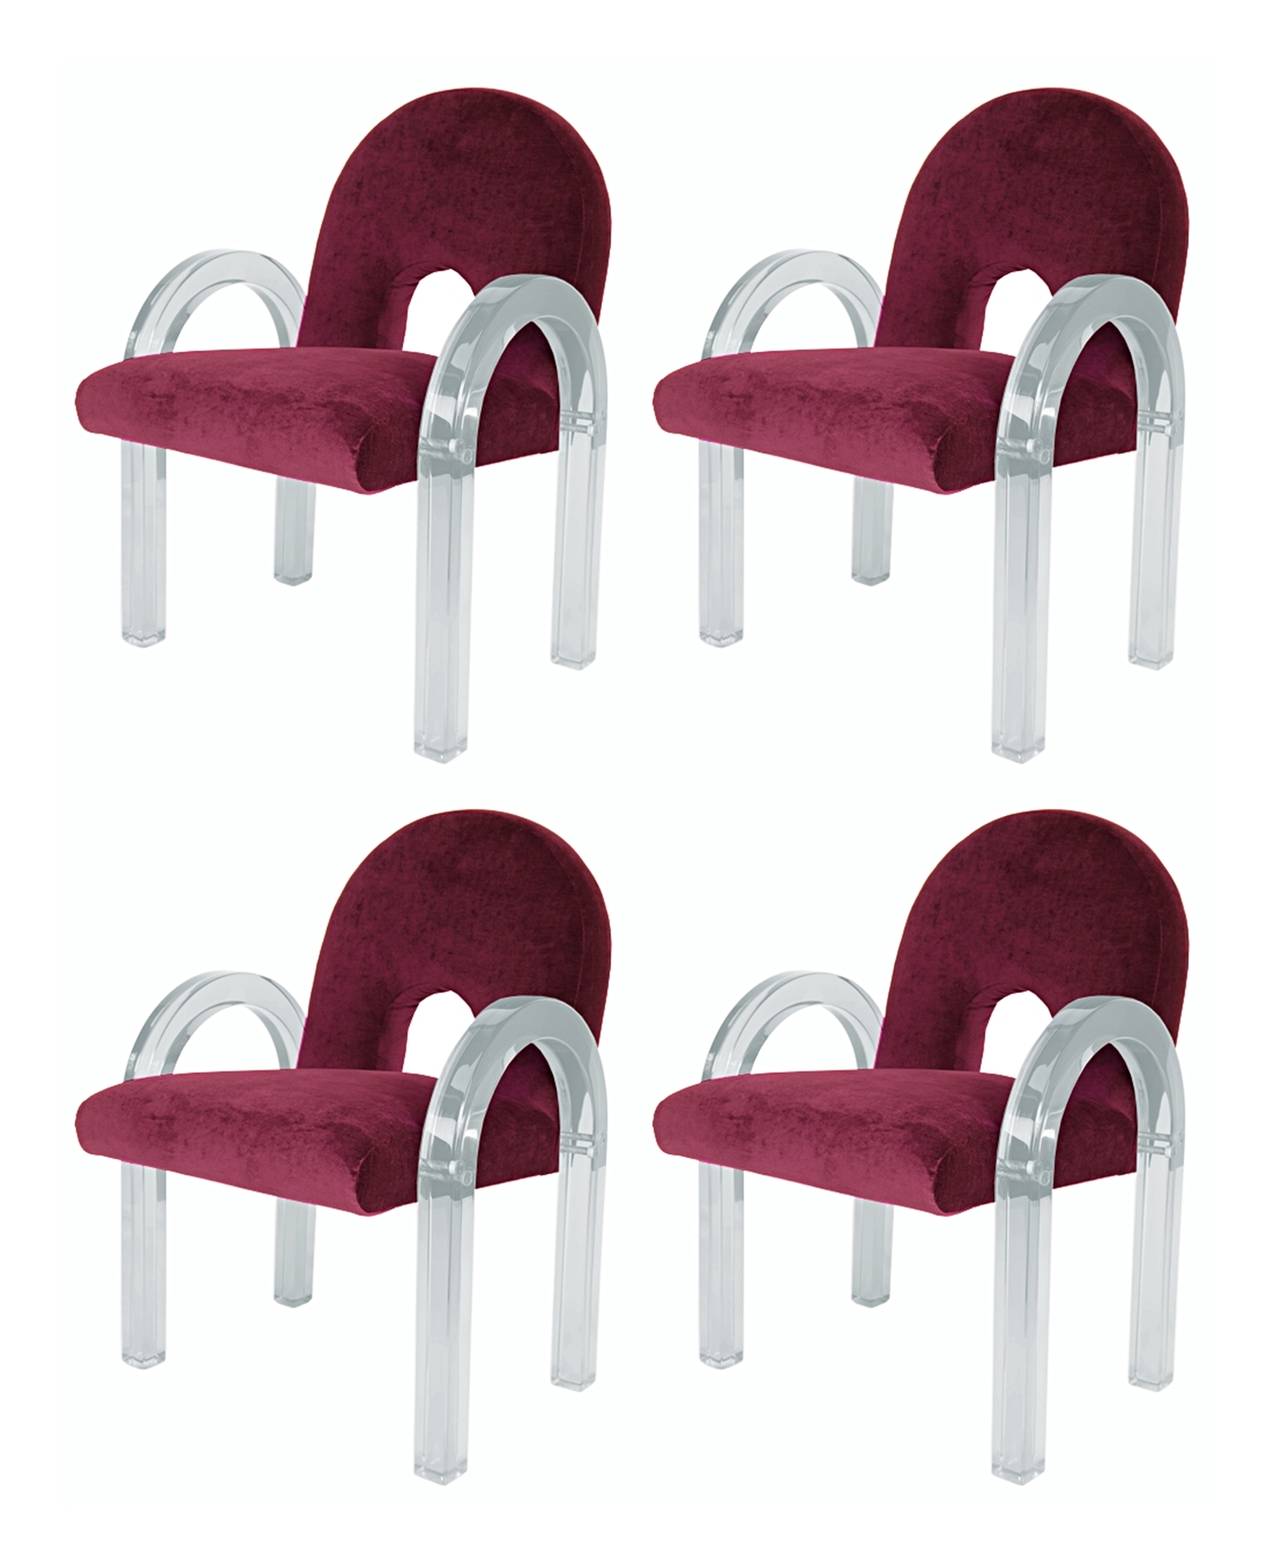 Stunning set of four armchairs designed and manufactured by Charles Hollis Jones as part of the 